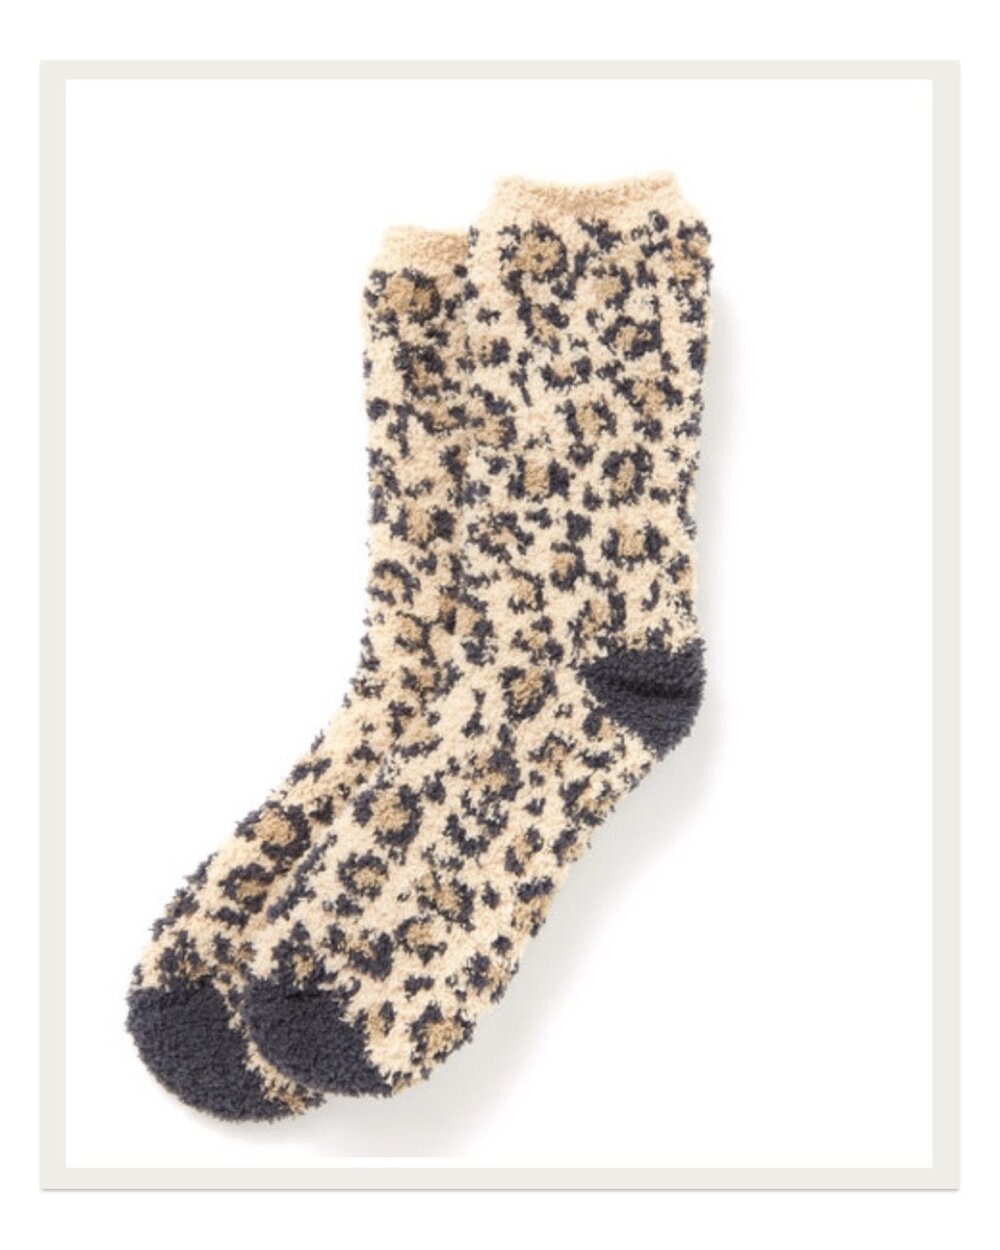 Easiest way to keep it cozy while you’re on the go? Fuzzy socks! I love these leopard print babies and feel a pep in my step as soon as I put them on.